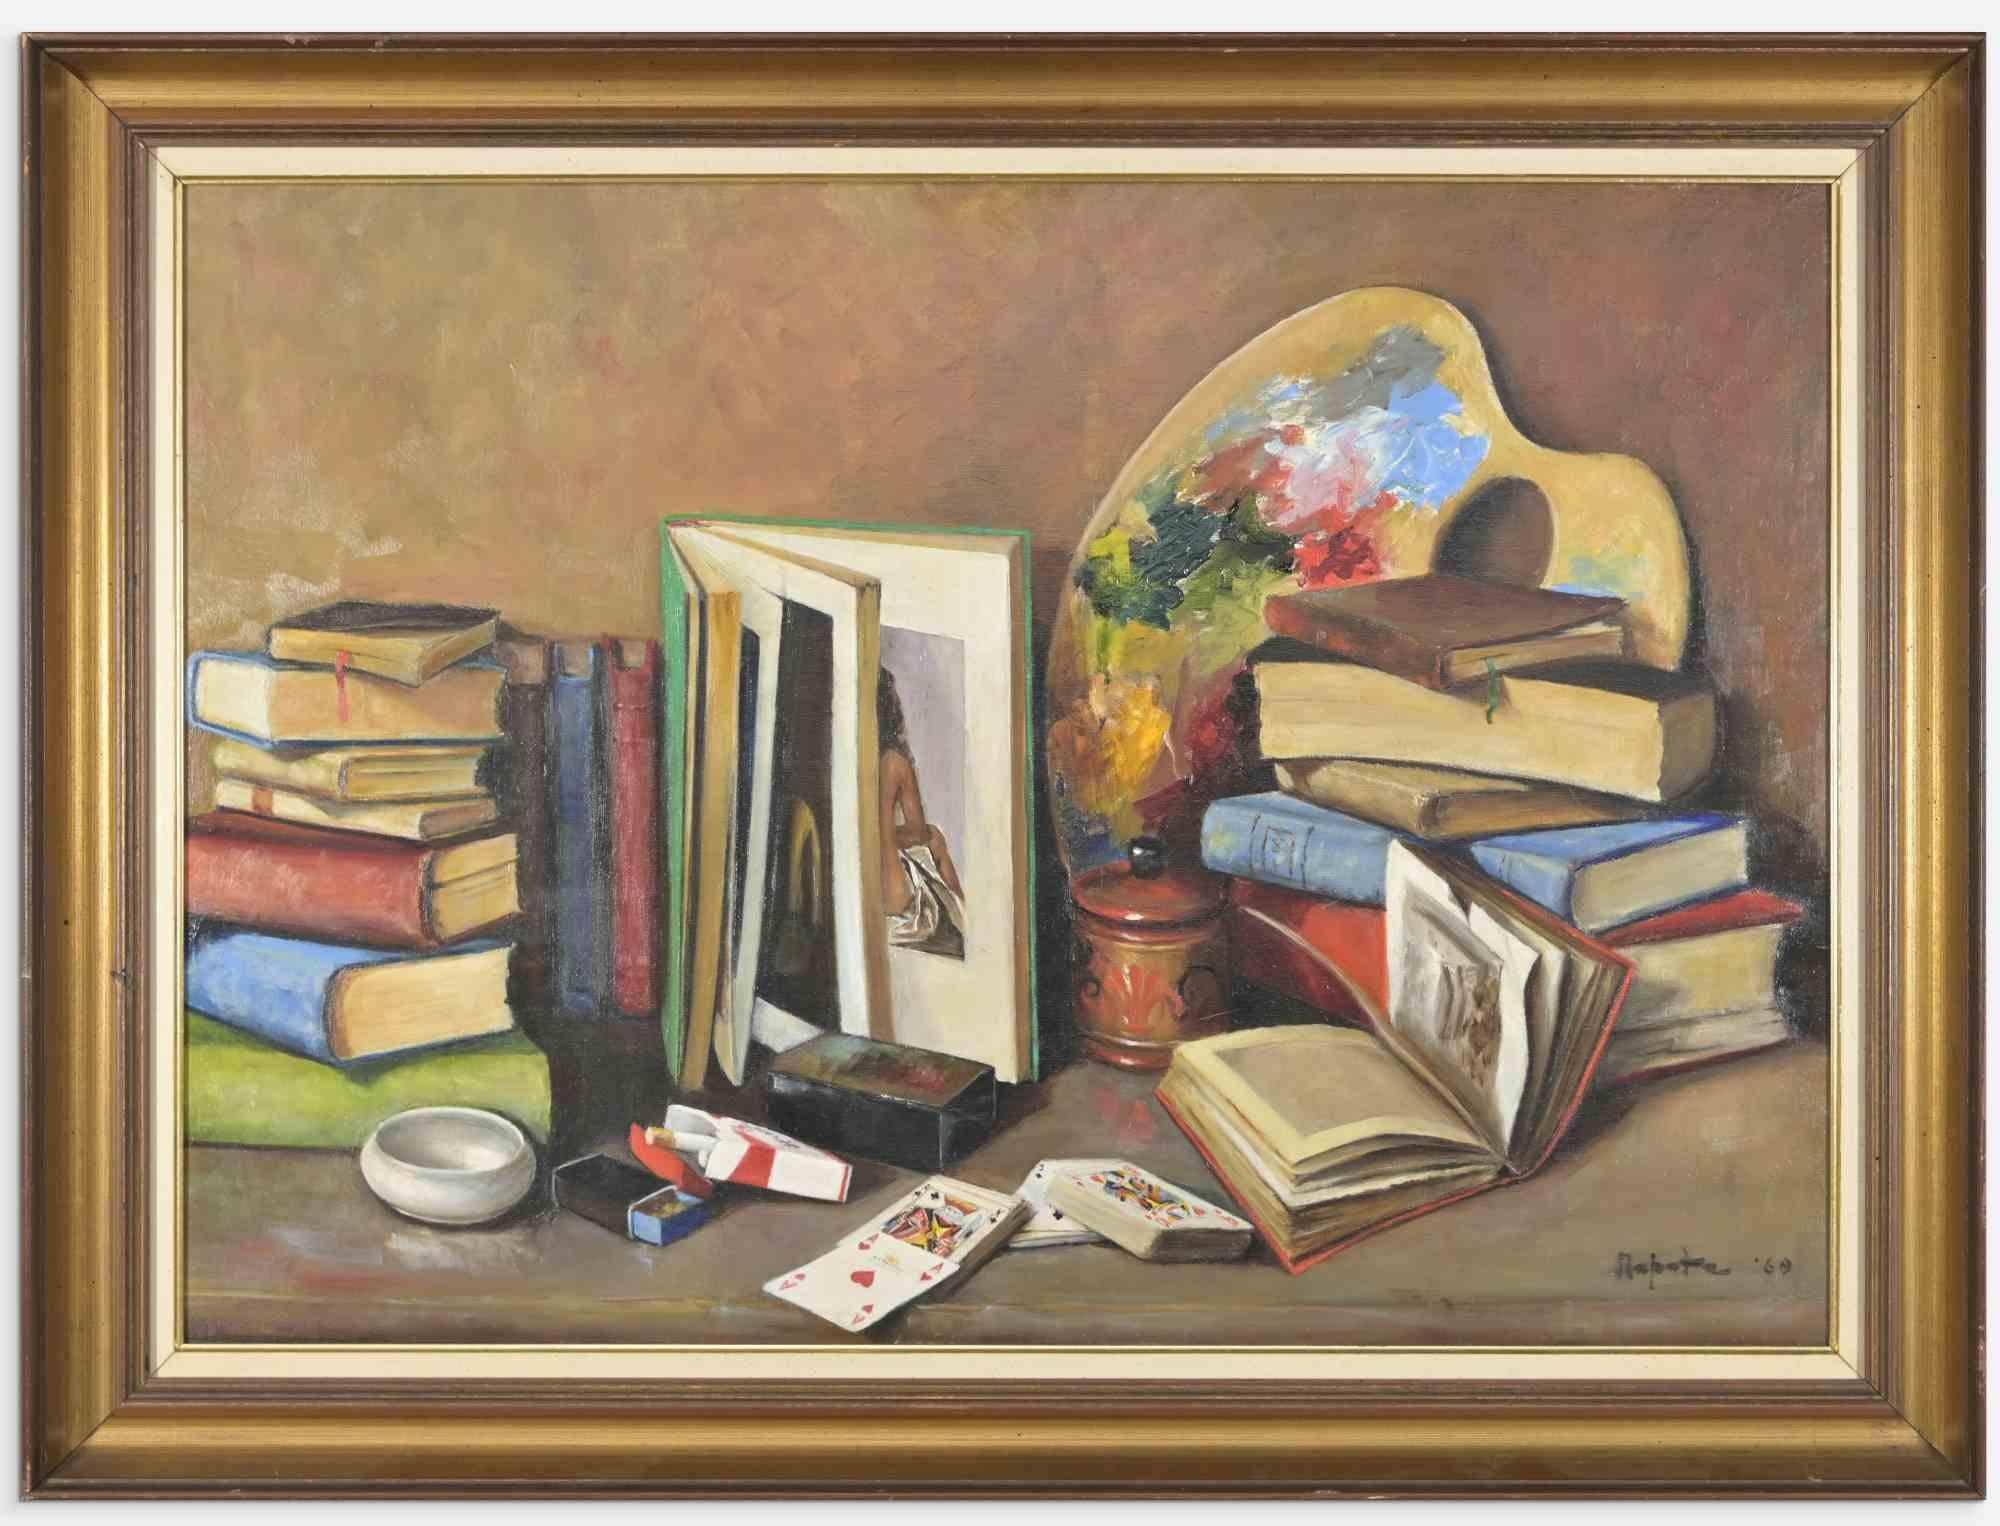 Unknown Still-Life Painting - Still Life with Palette and Books - Oil on Canvas -  1969